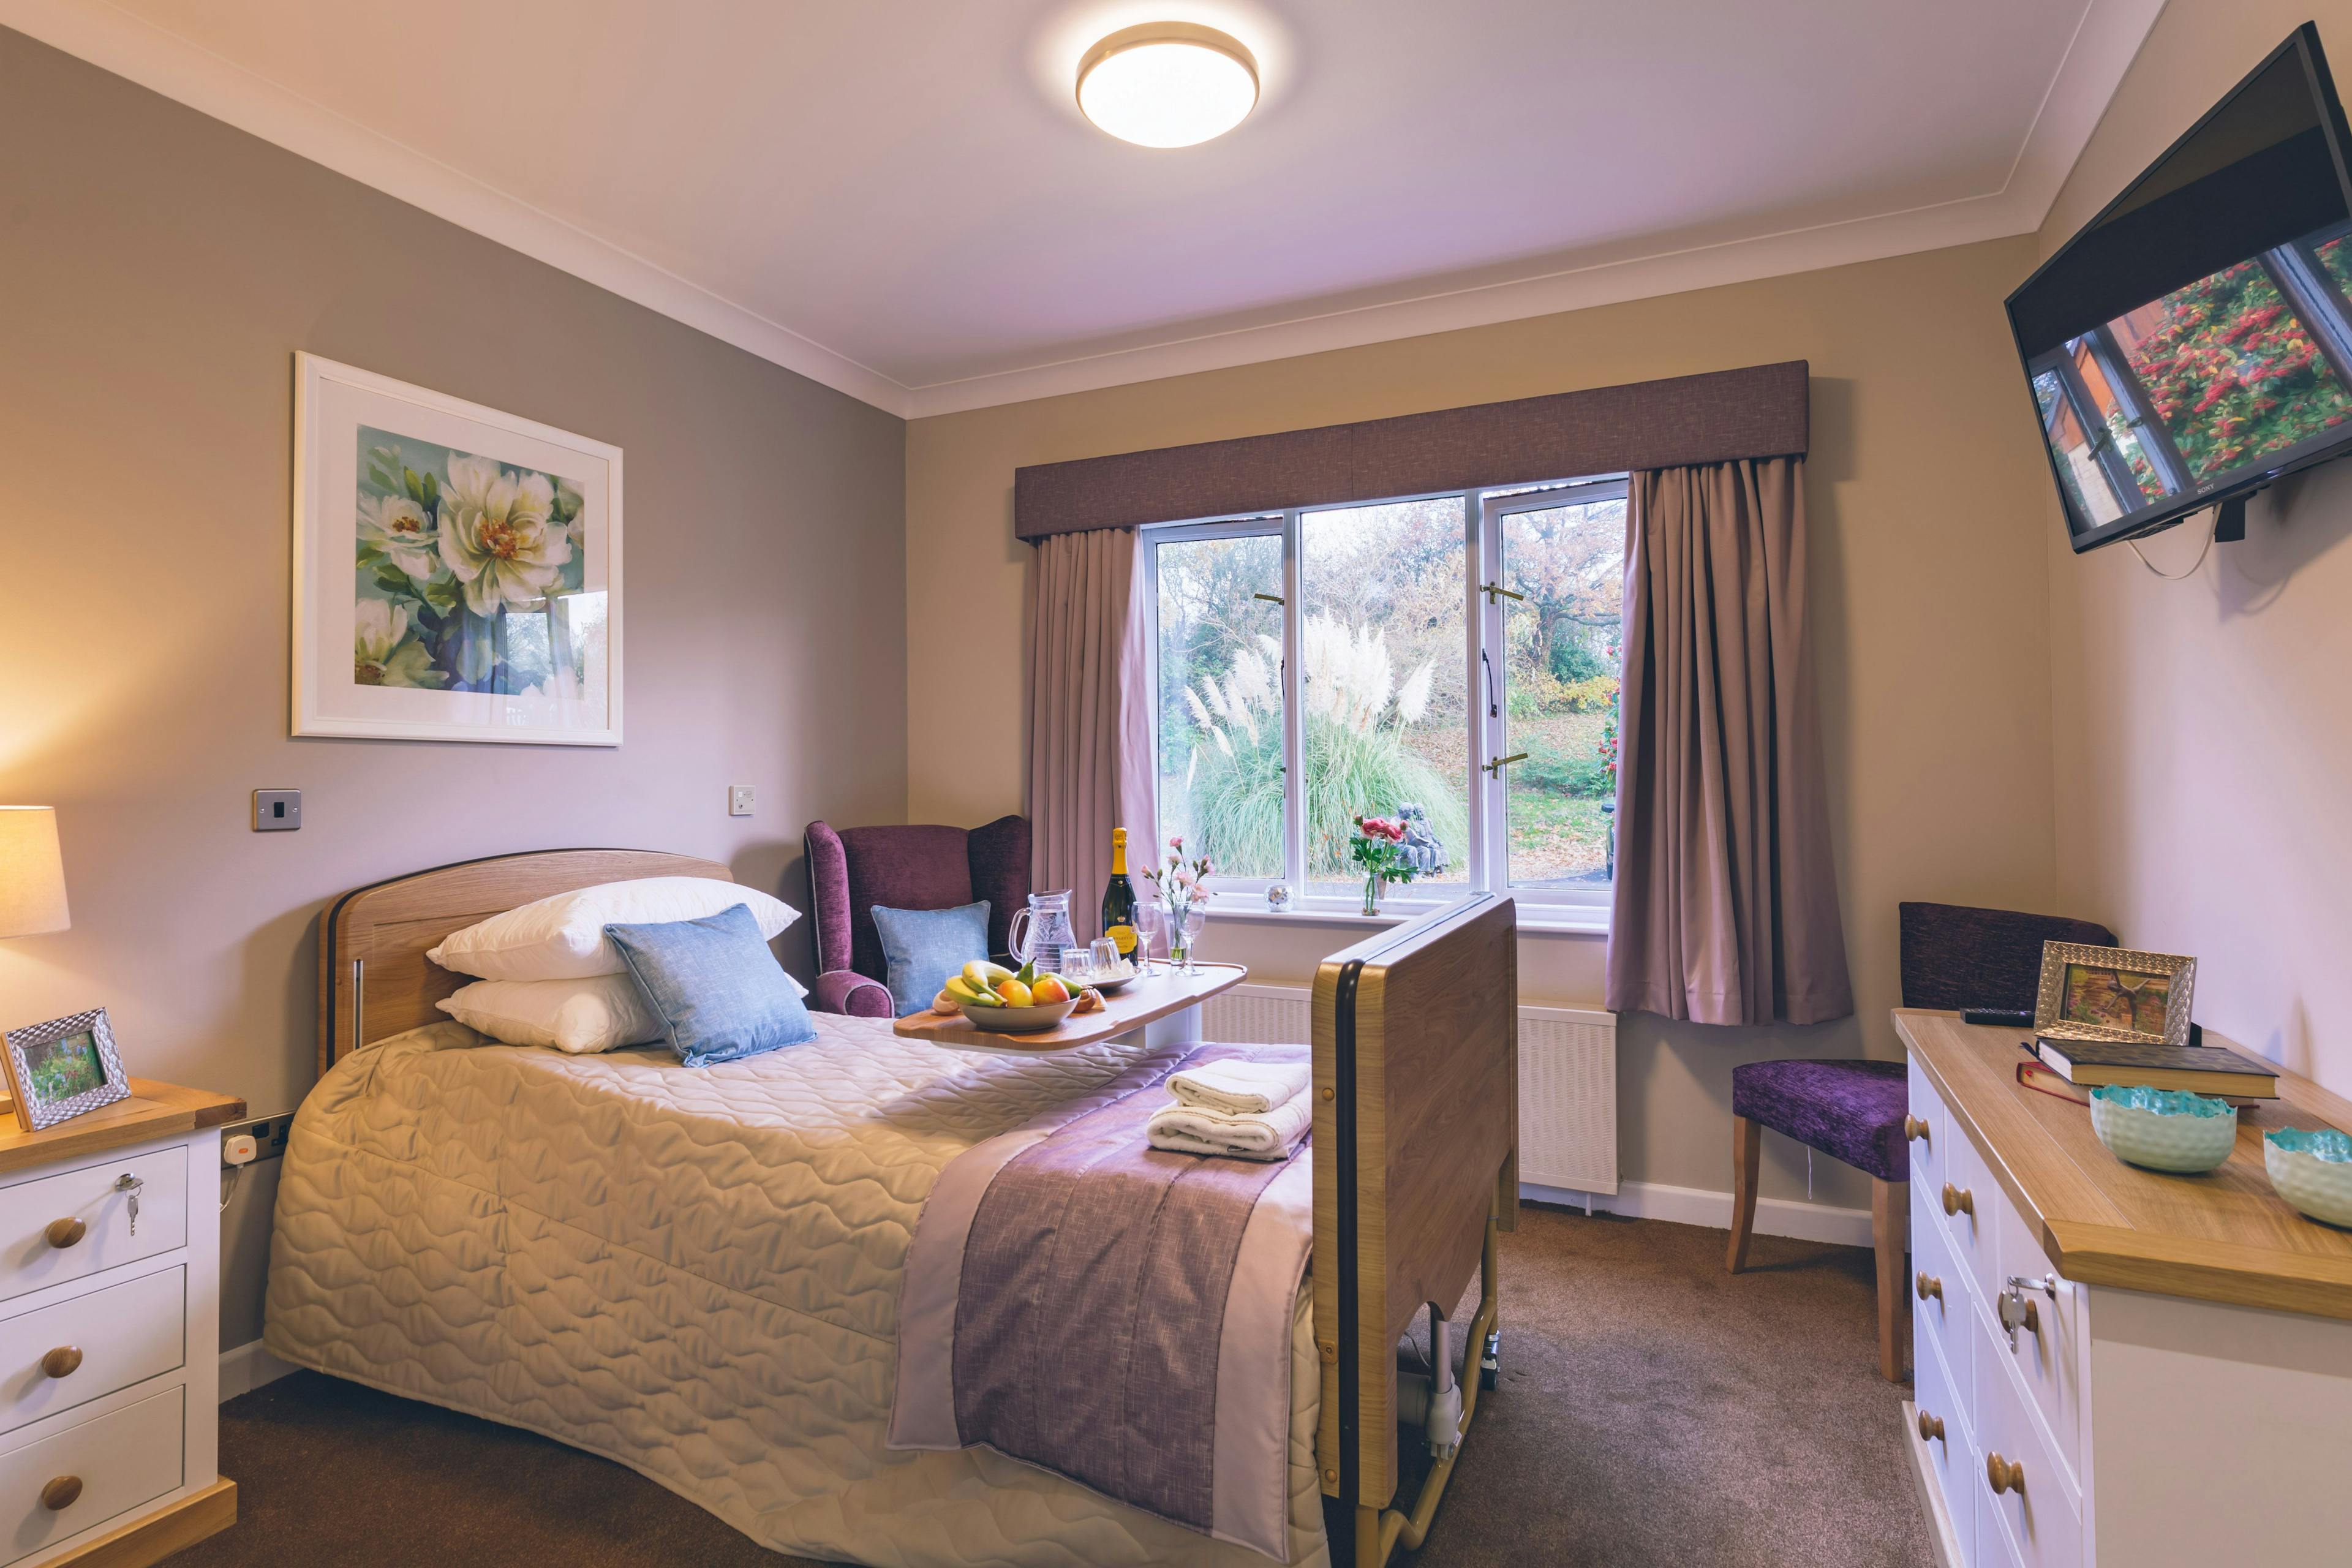 Bedroom of Vecta House Care Home in Newport, Isle of Wight